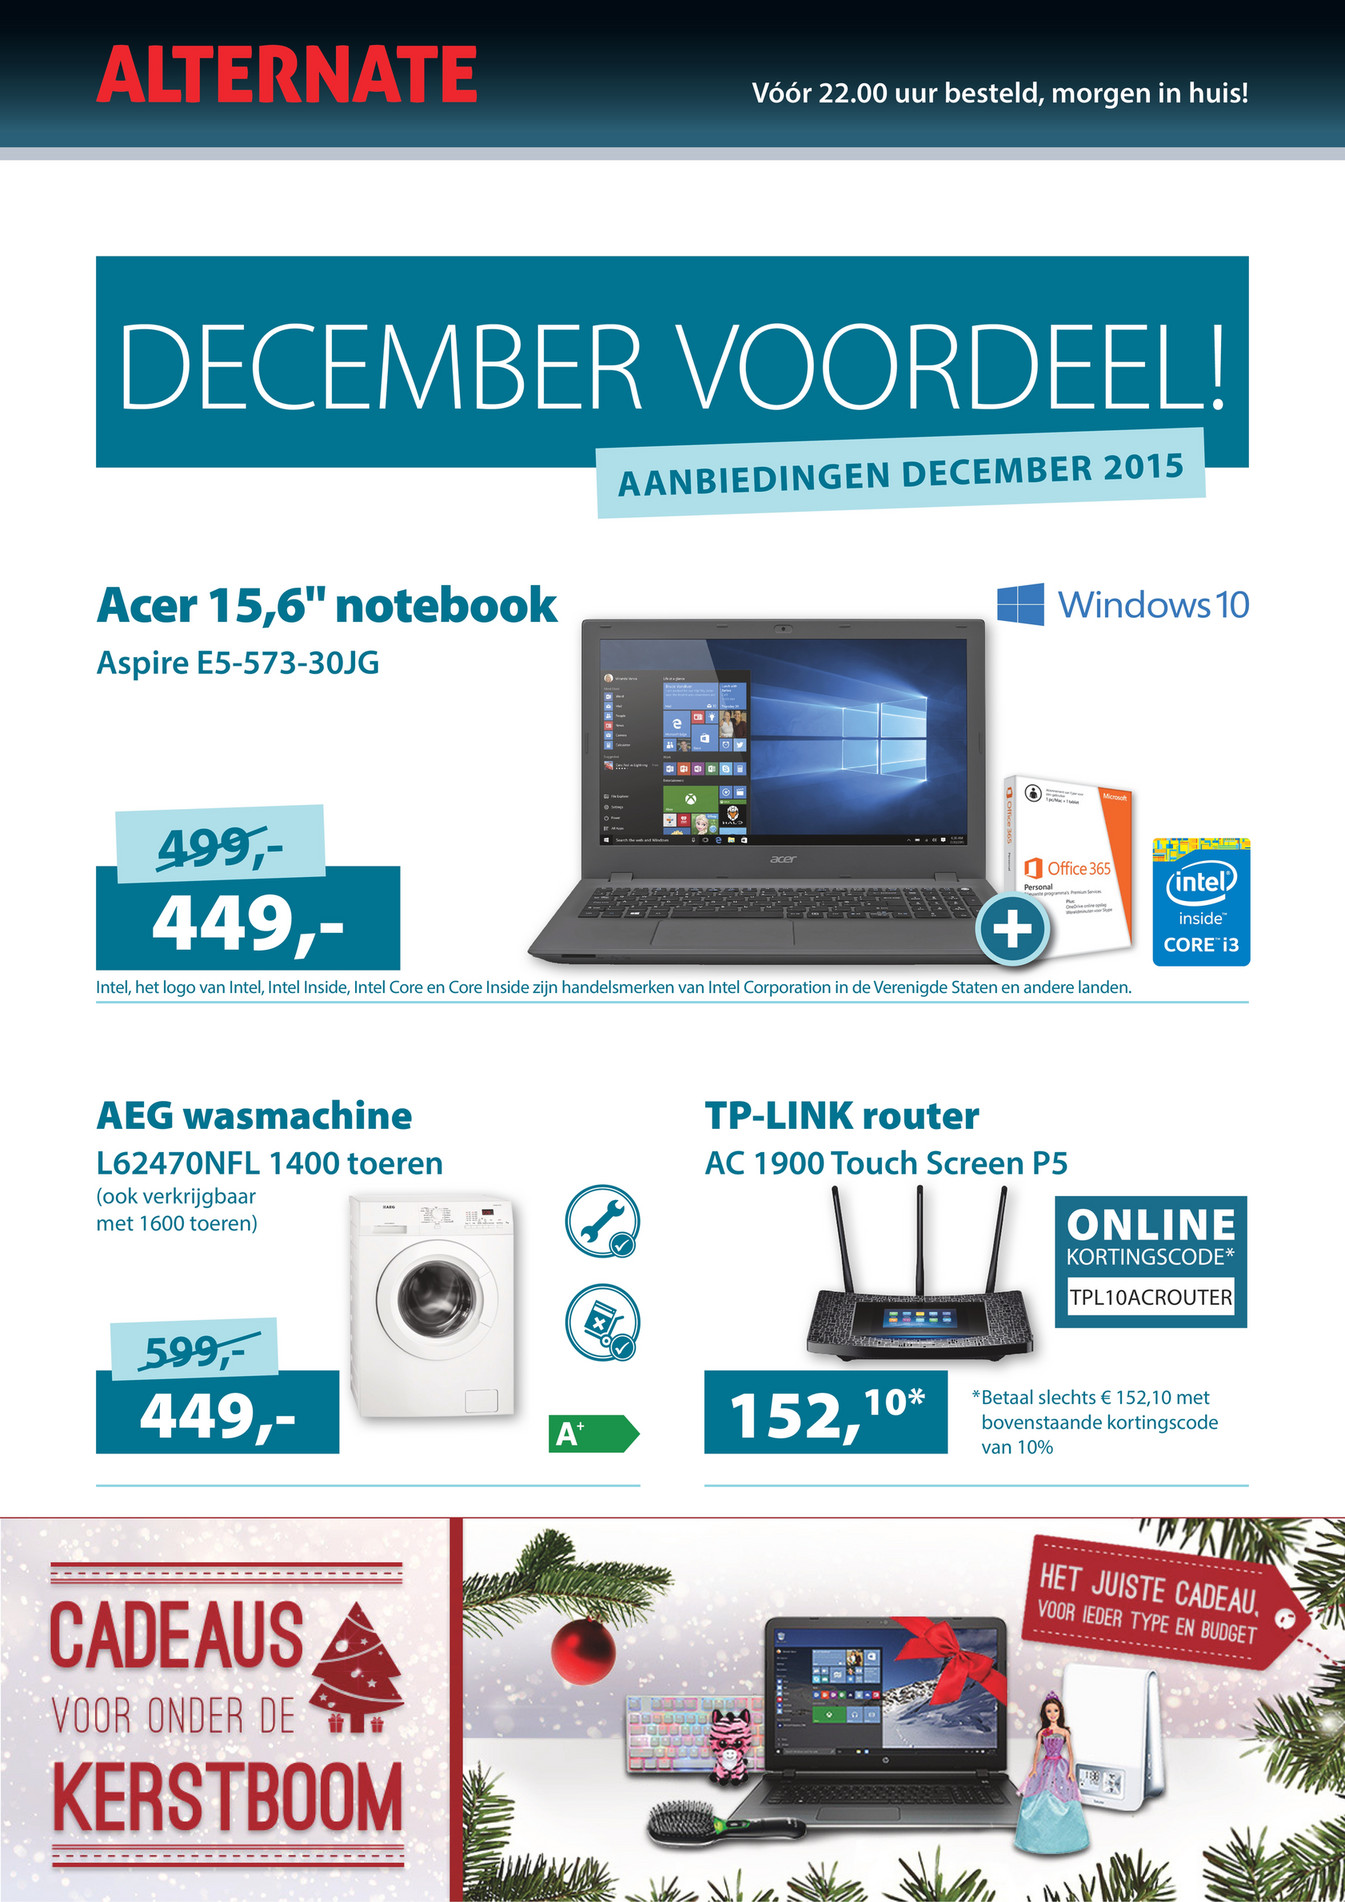 Reclame-nu 31 dec - 2-3 - Created with